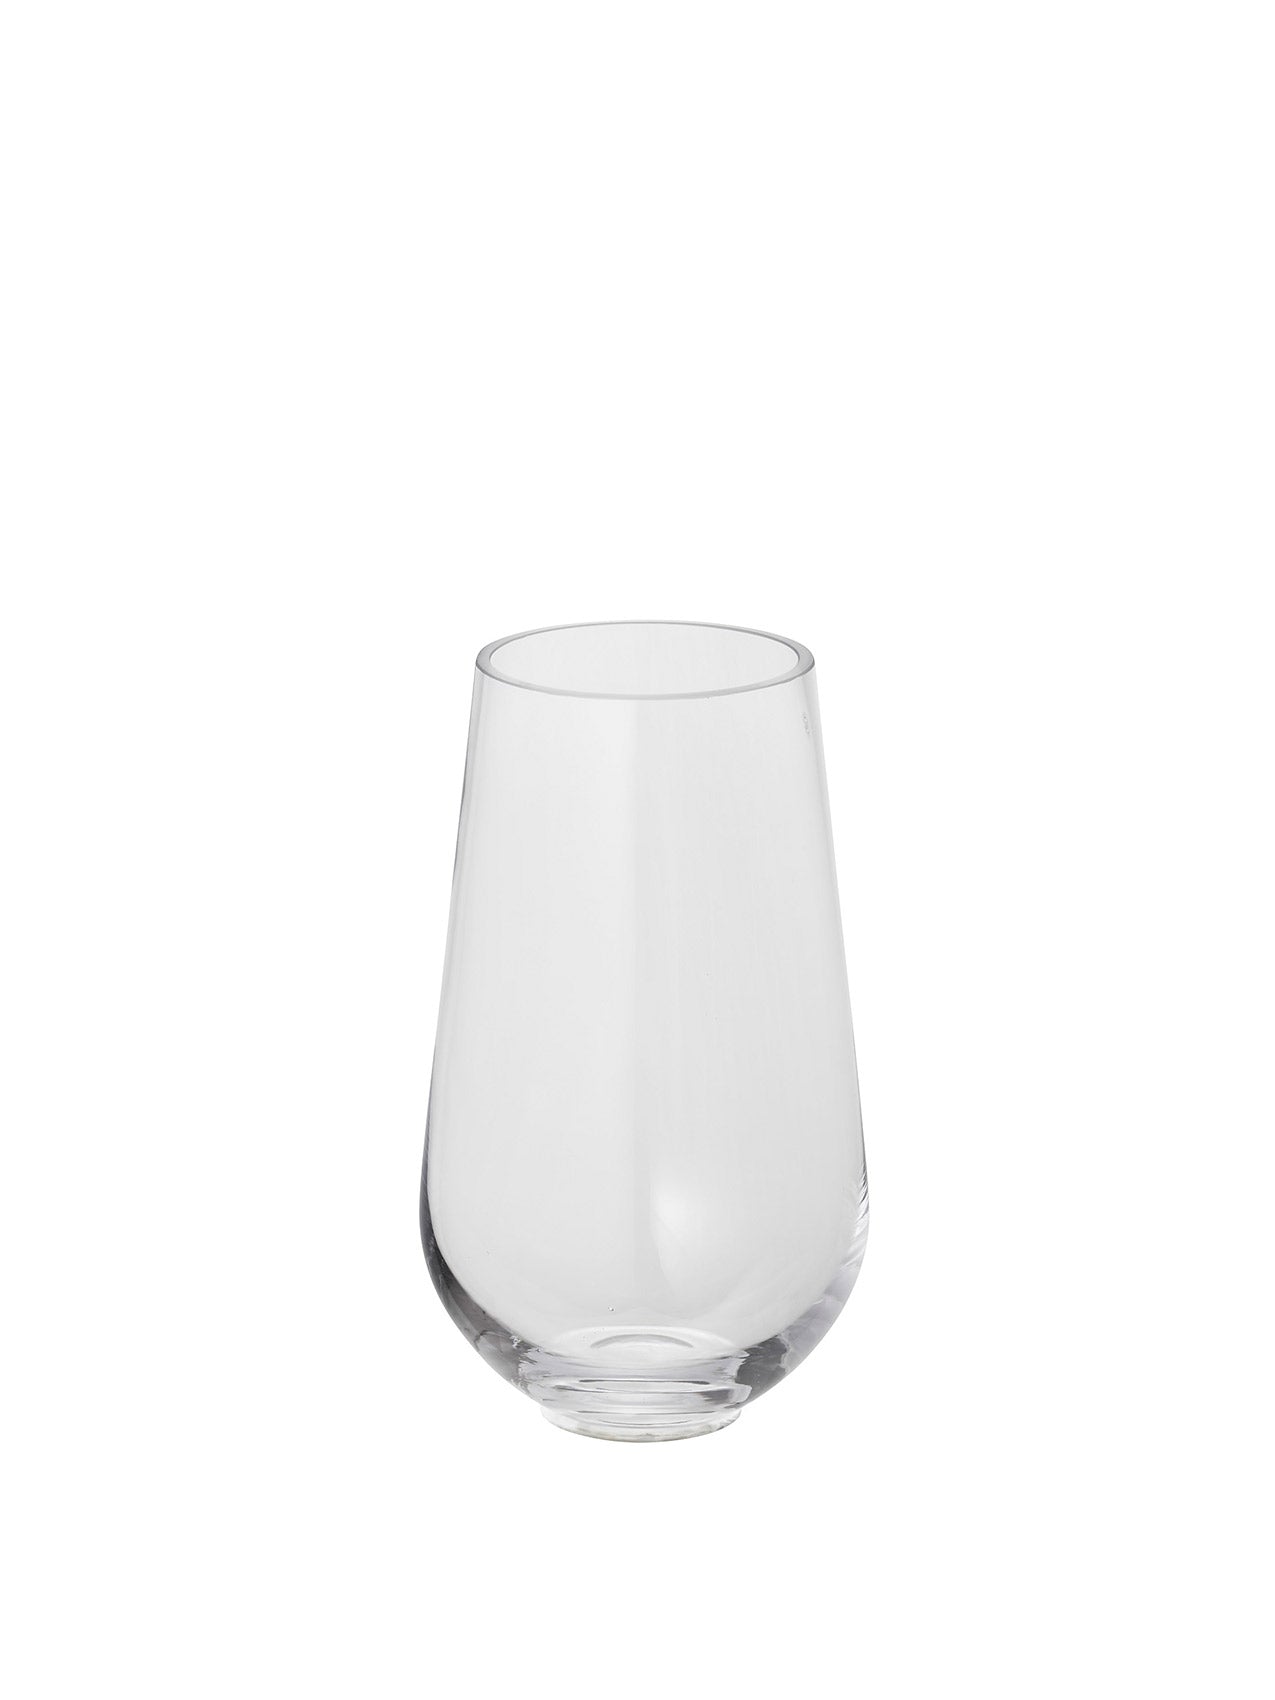 Echasse Vase, S, Clear, Glass, 1 pc